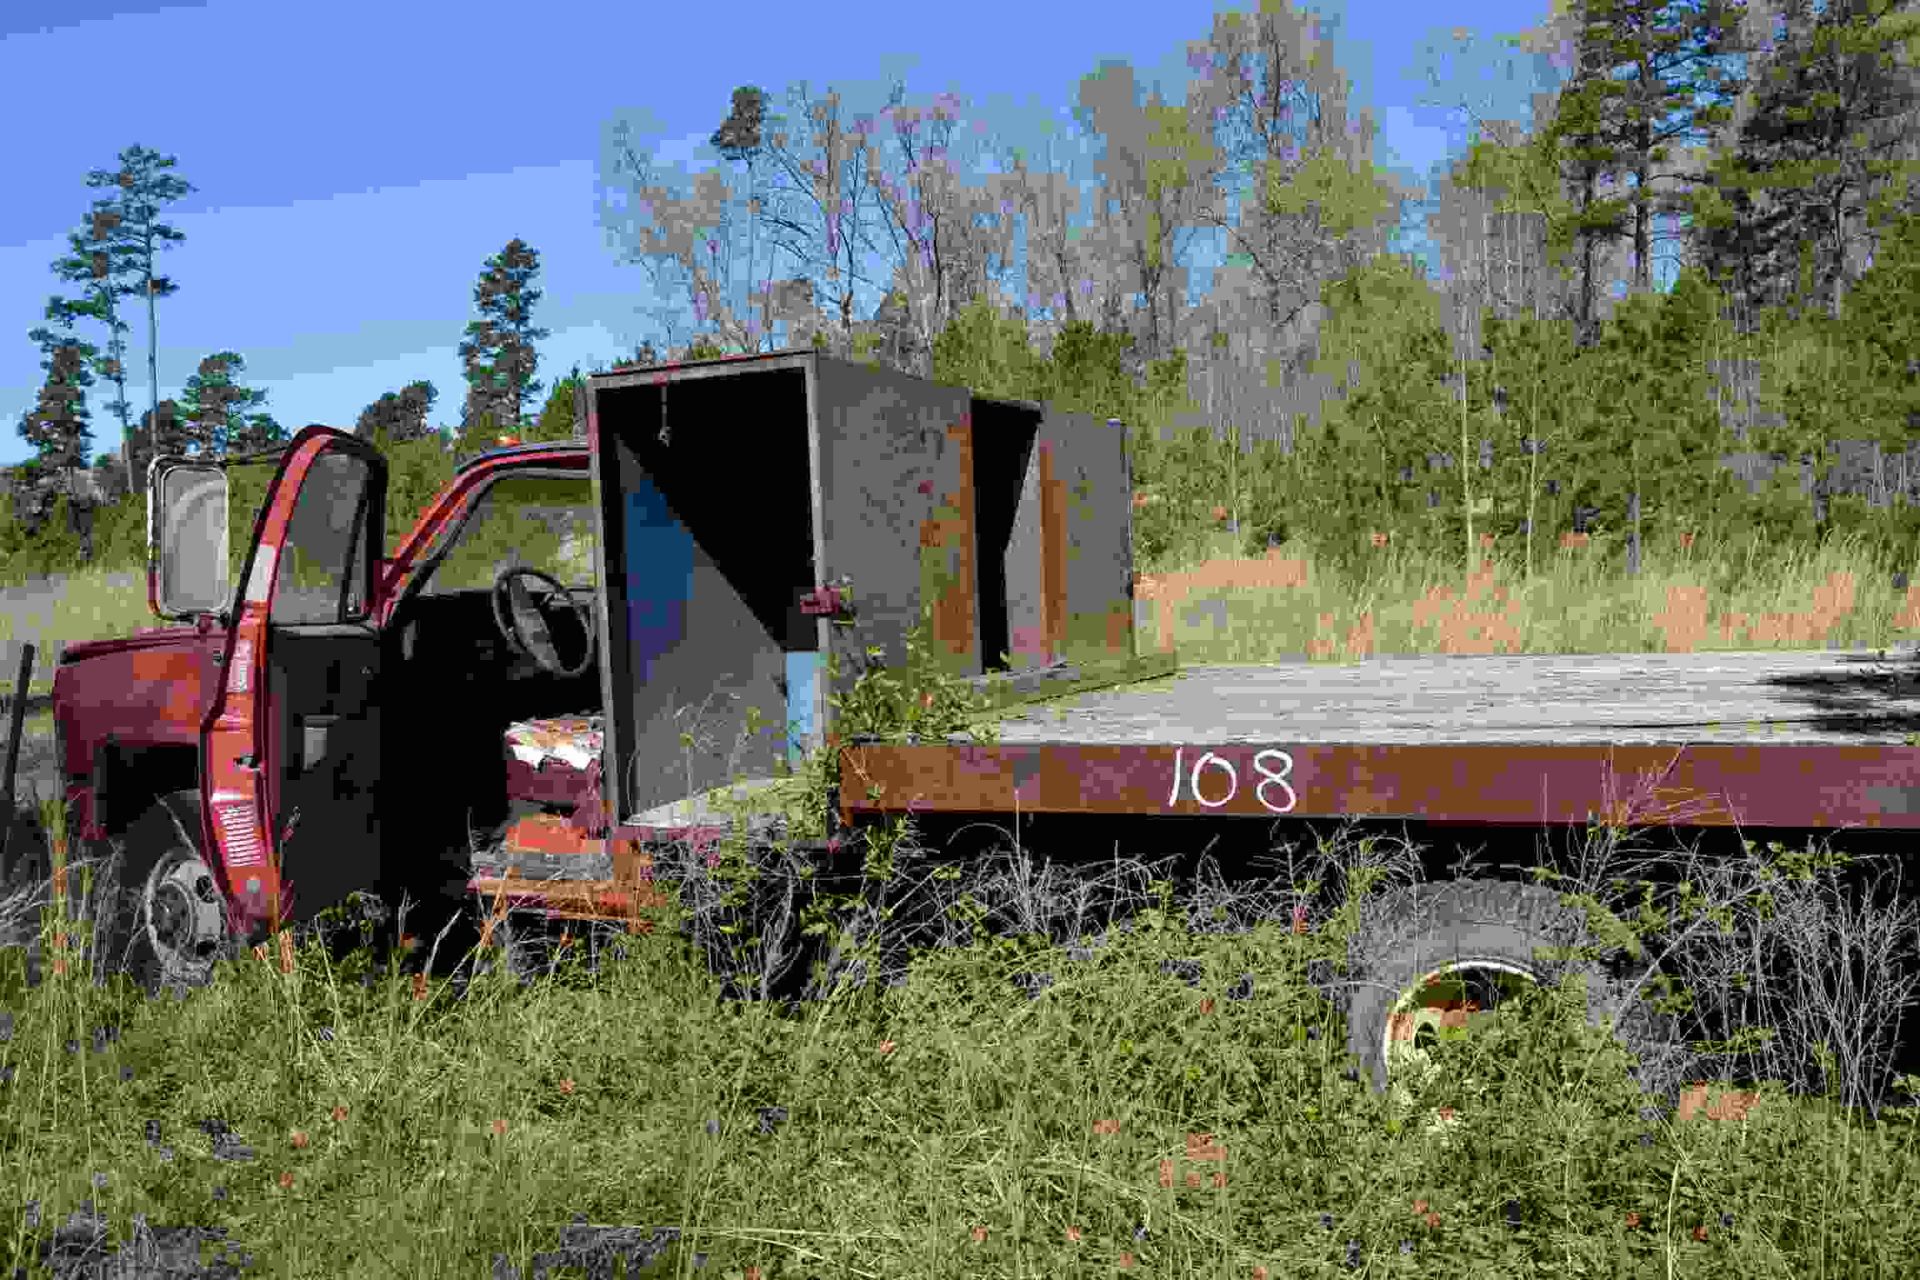 1989 GMC 3500 4X4 FLATBED TRUCK - Image 3 of 4